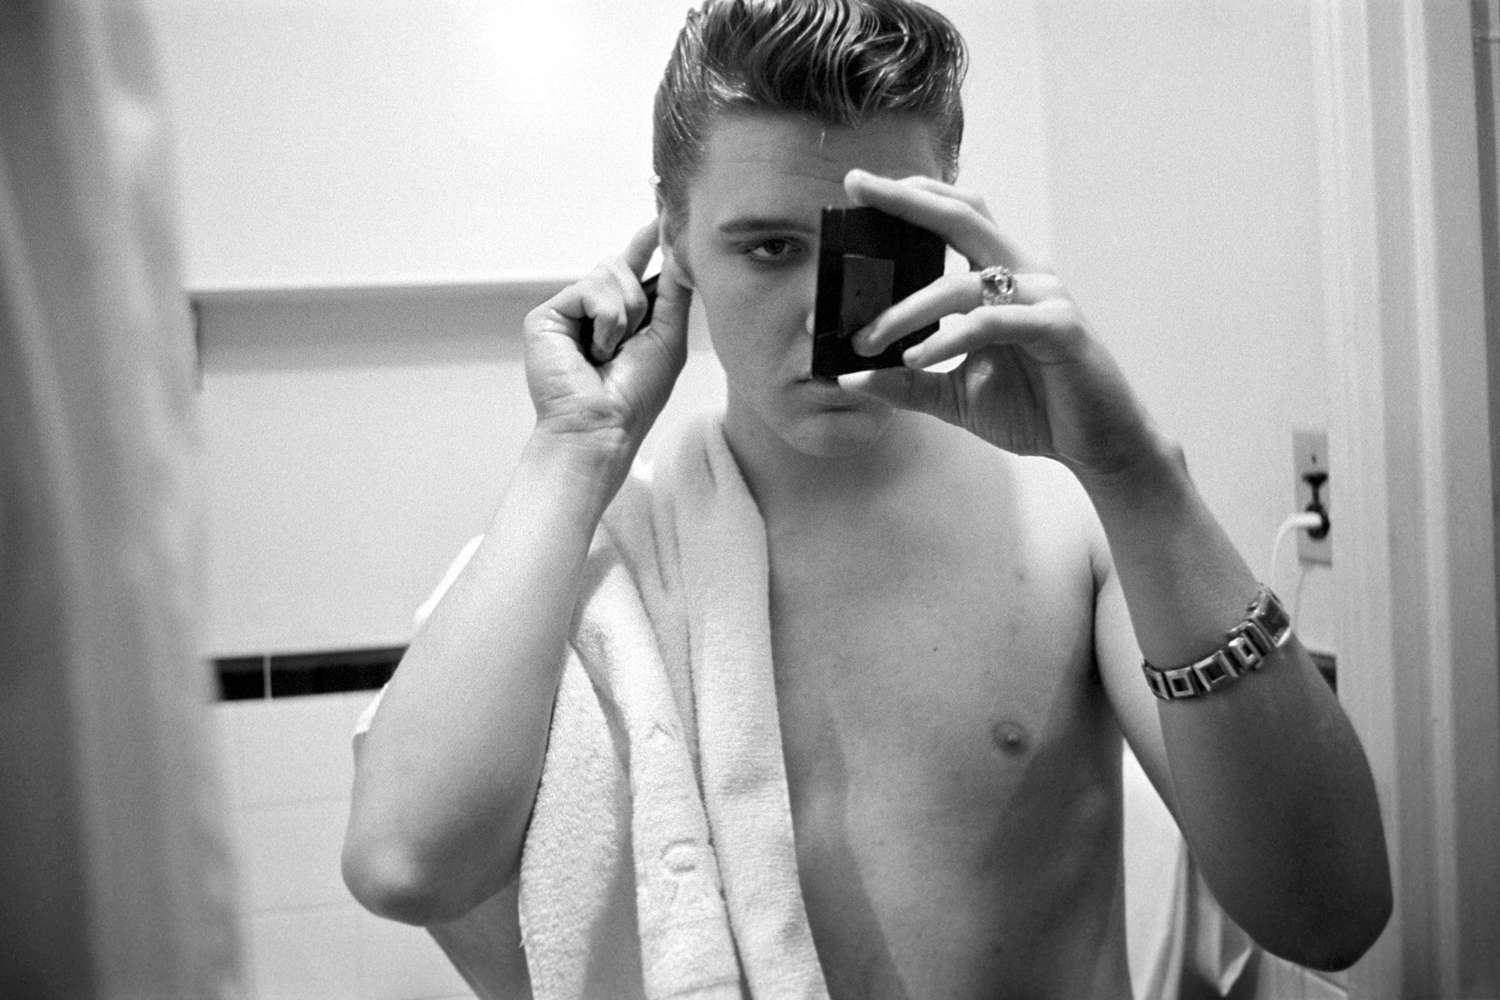 March 17, 1956. The Warwick New York. Elvis in his hotel bathroom an hour before returning to perform on 'Stage Show.' I love this one…he’s got full concentration. Elvis had just finished showering — he's looking into a small ladies hand mirror to see what's going on with the back of his hair, in a bigger mirror. He's using Vaseline hair tonic, not  bear grease.